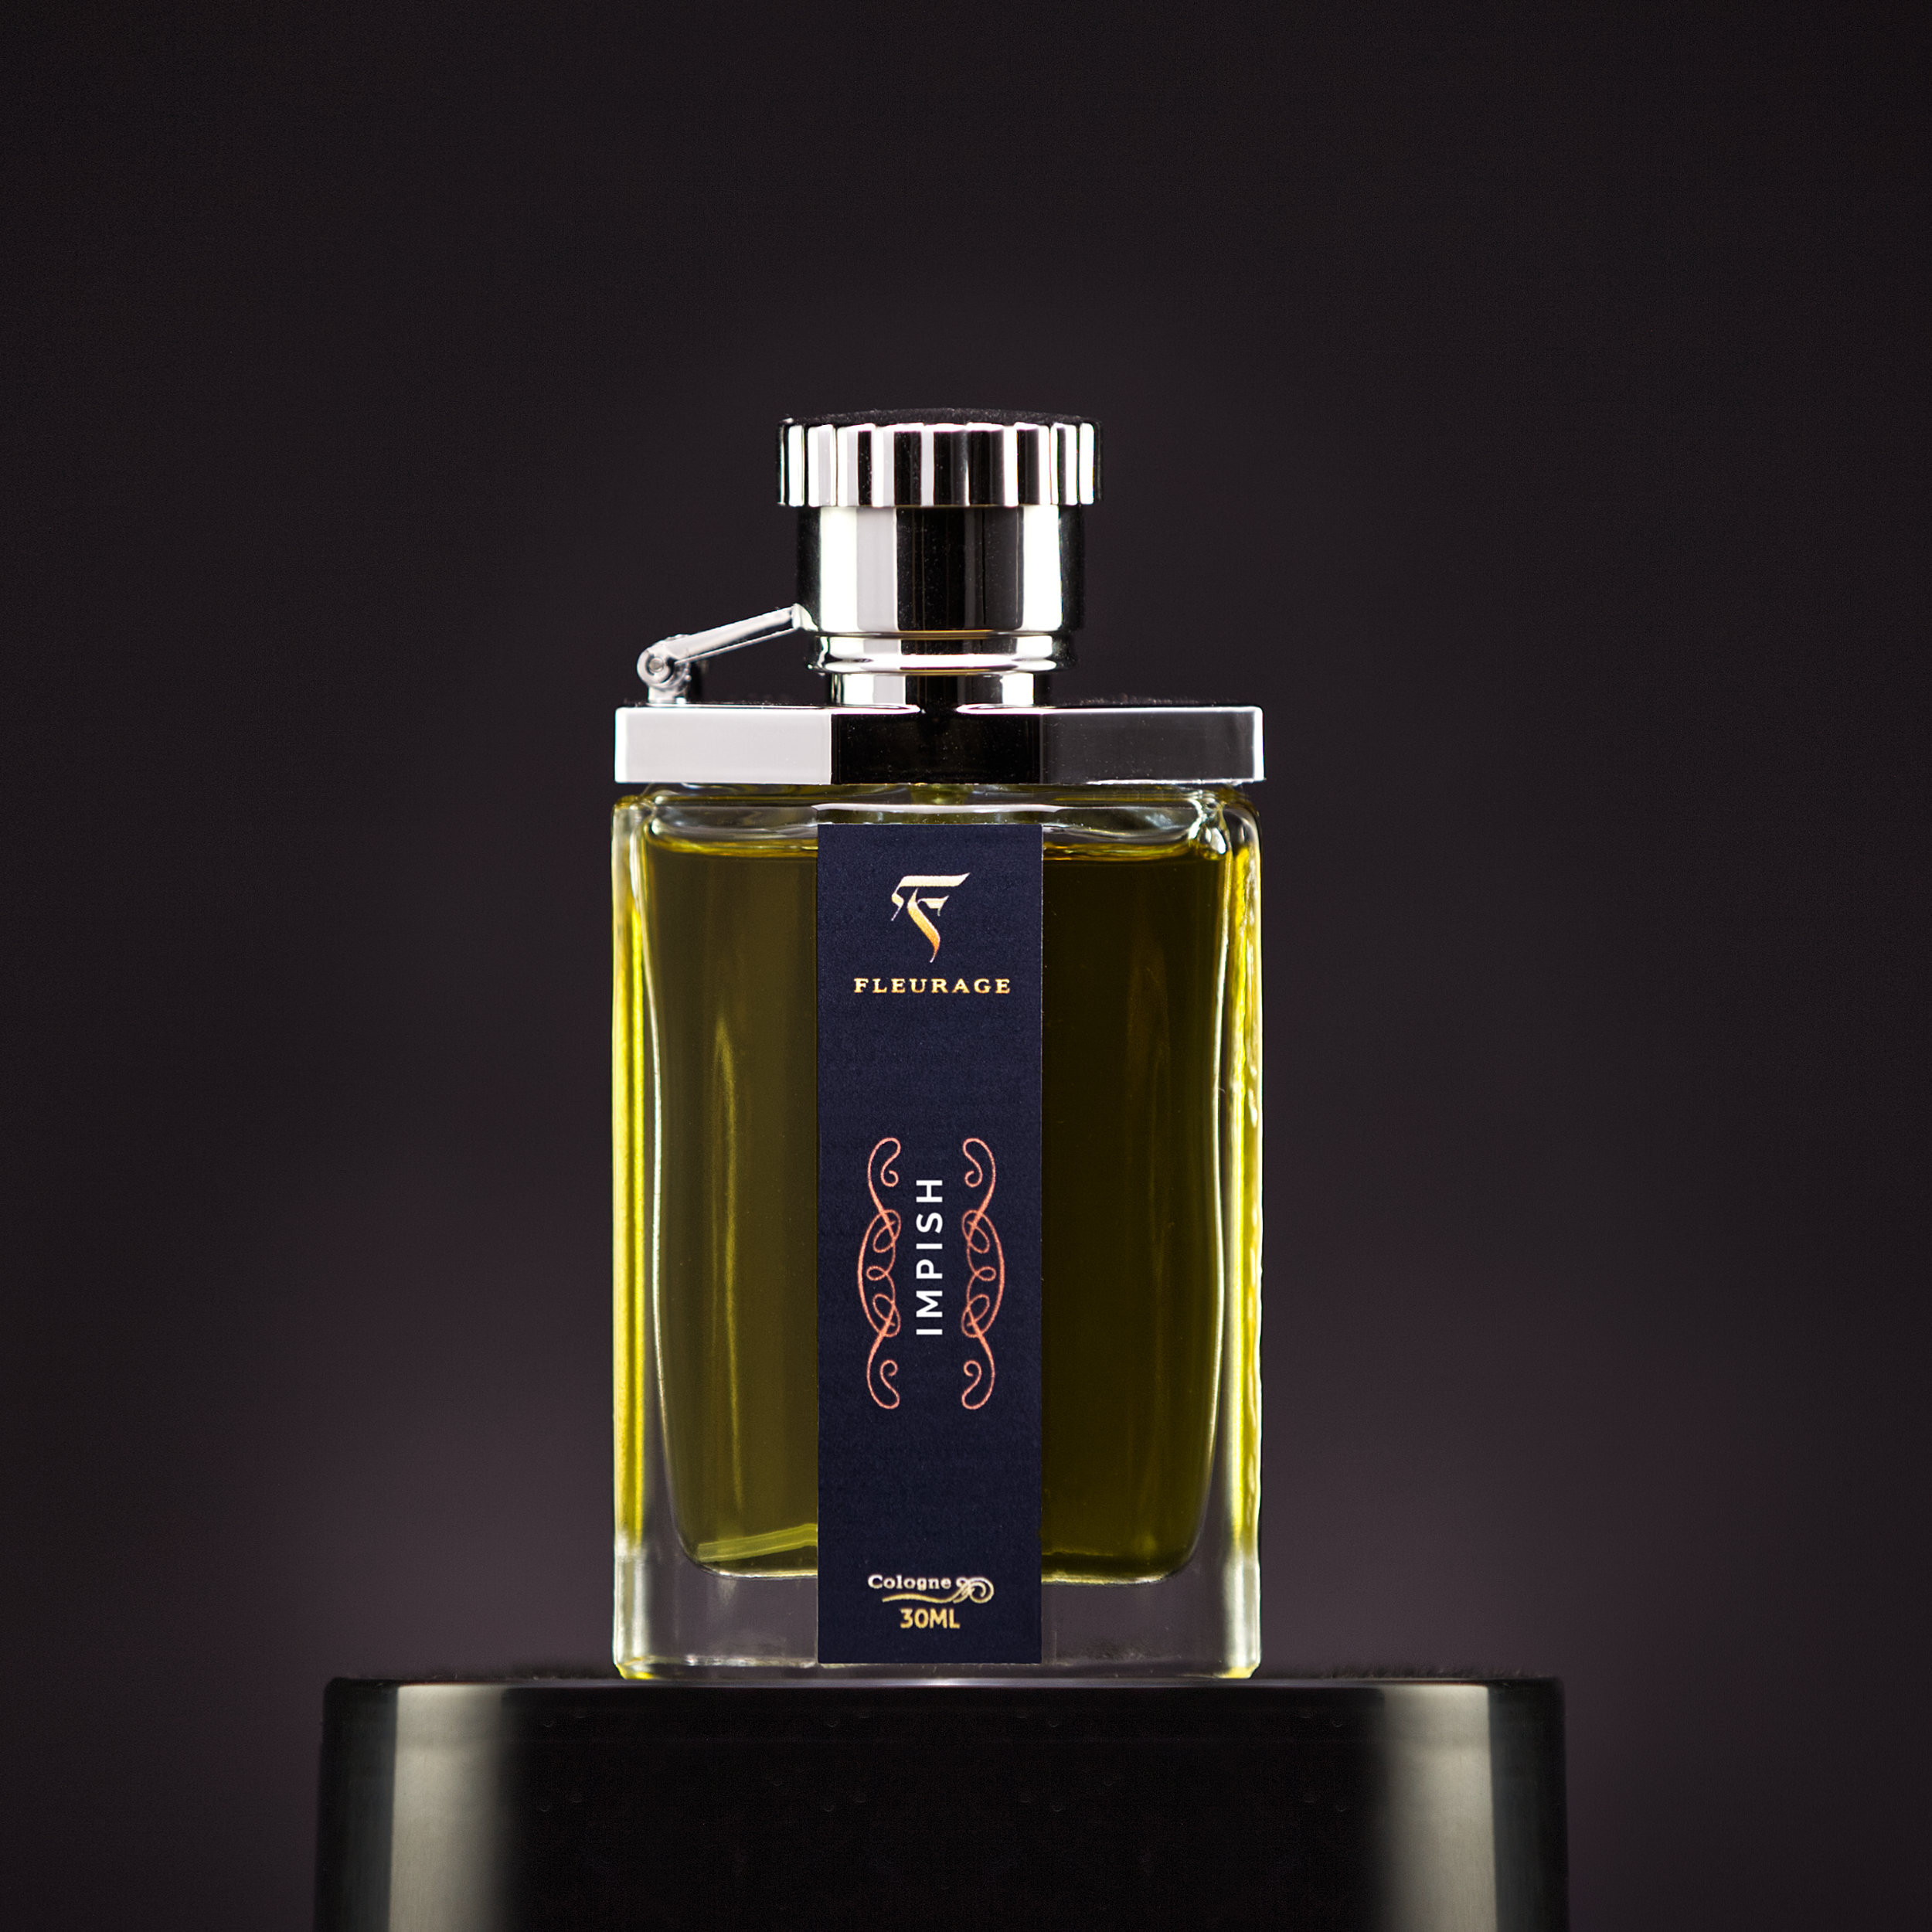 Bedouin Cologne – Special oud fragrance | Fleurage Perfume